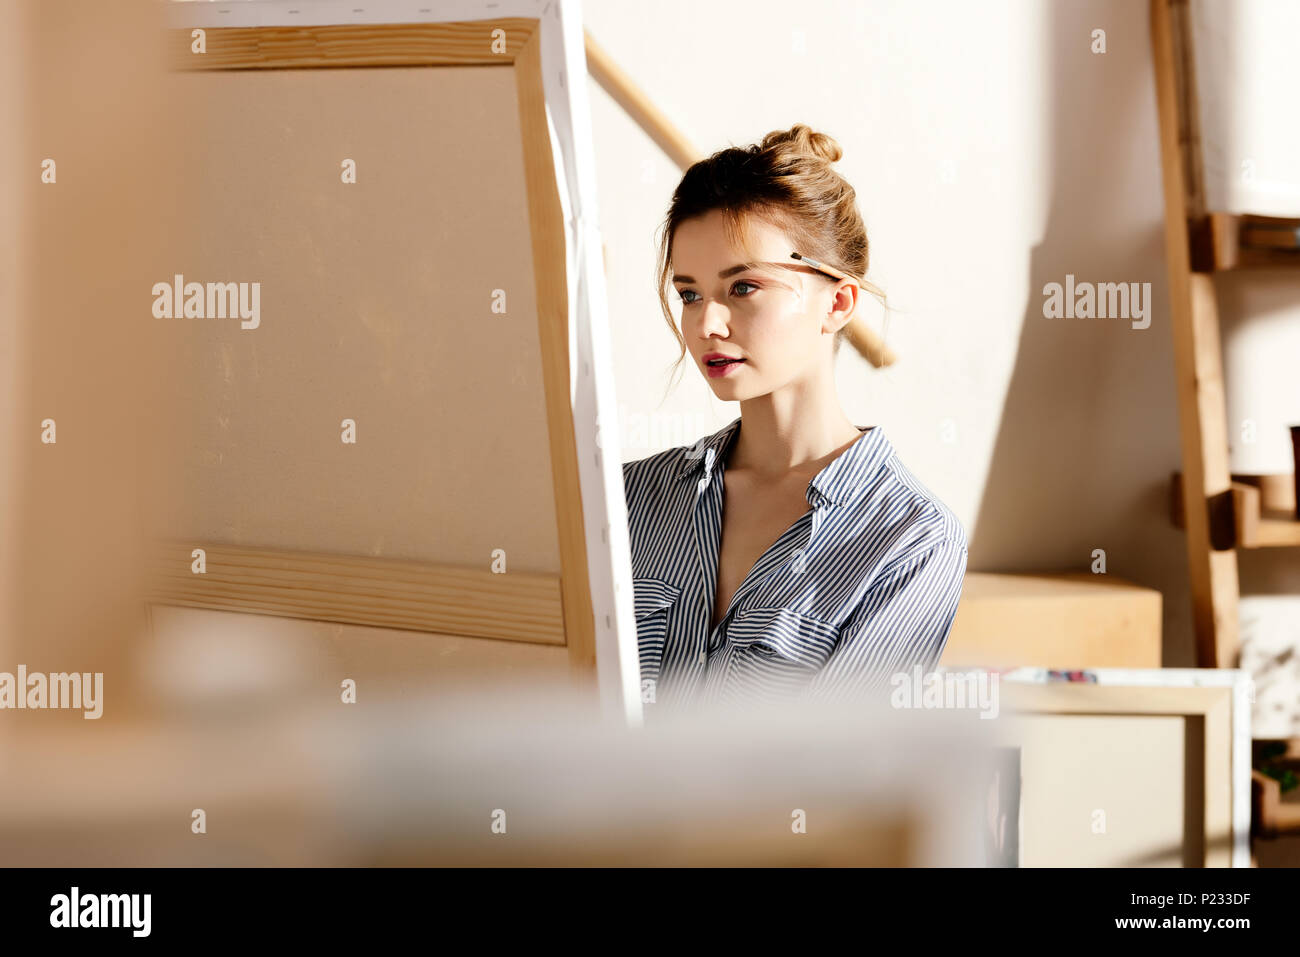 young female artist with paintbrush behind ear looking at painting Stock Photo